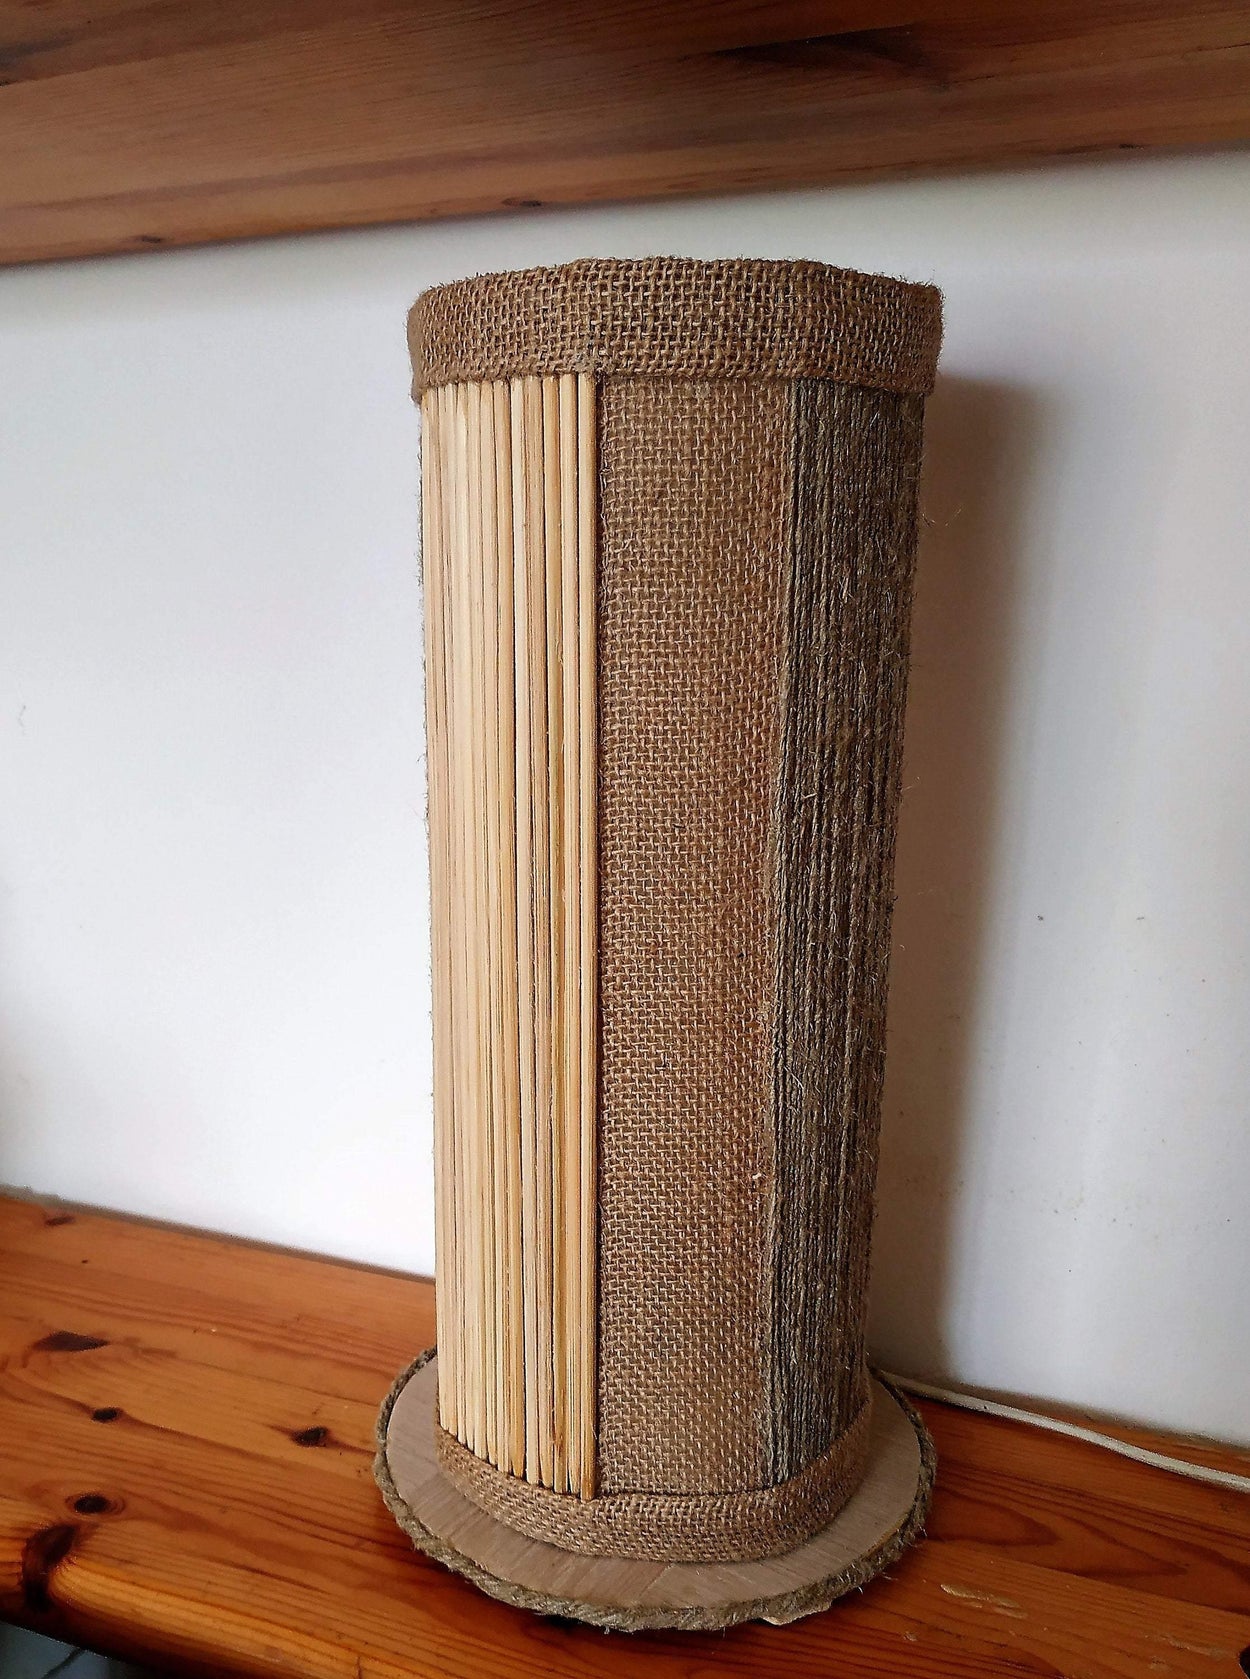 Exclusive Table lamp for bedroom in eco-style/country style - GLEZANT designer goods store. 